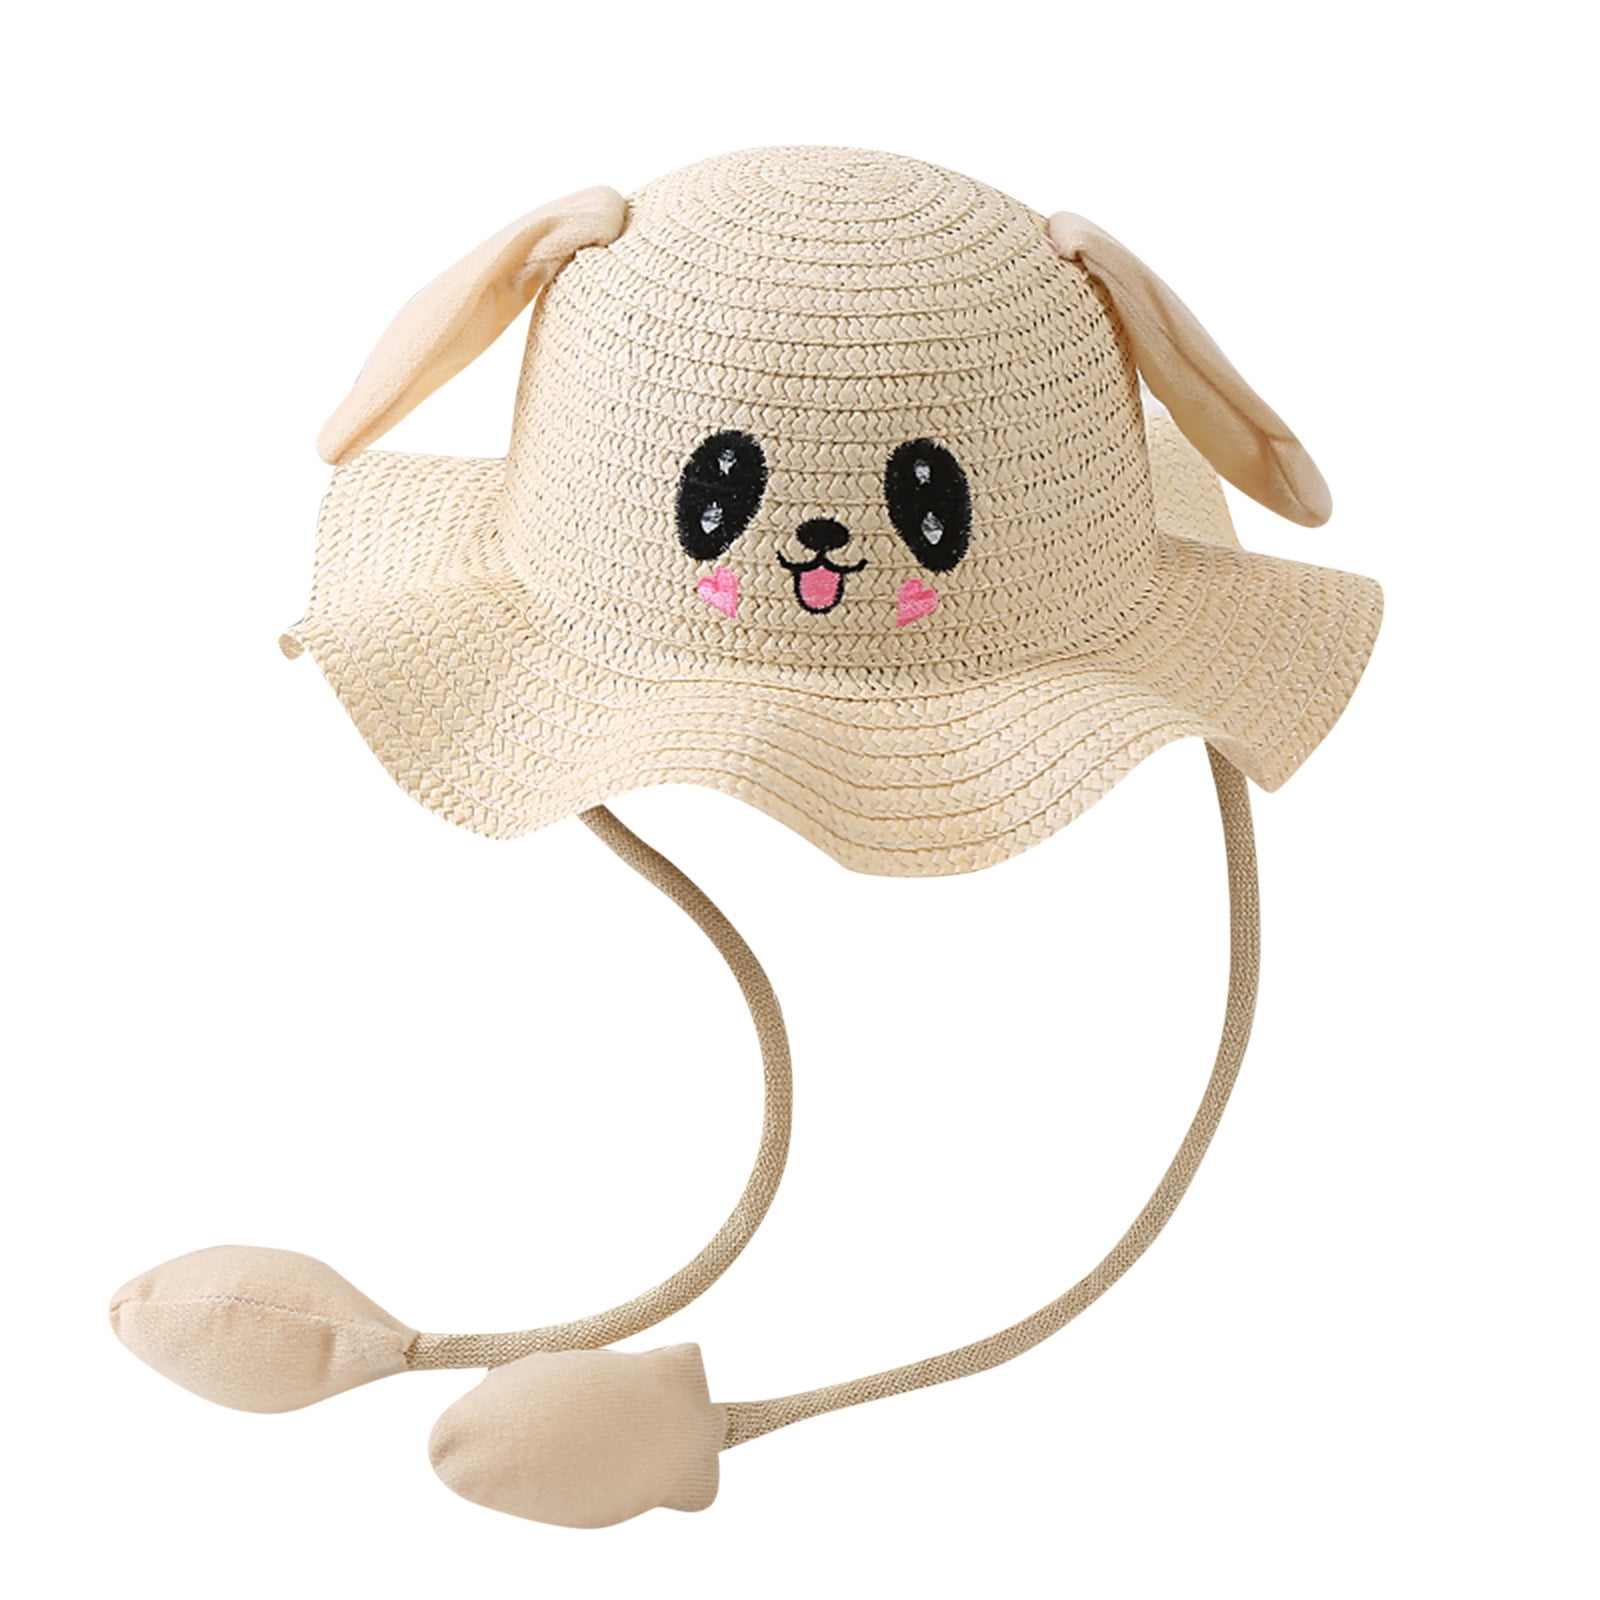 shpwfbe hats summer baby air bag sun with moving ears children rabbit ...